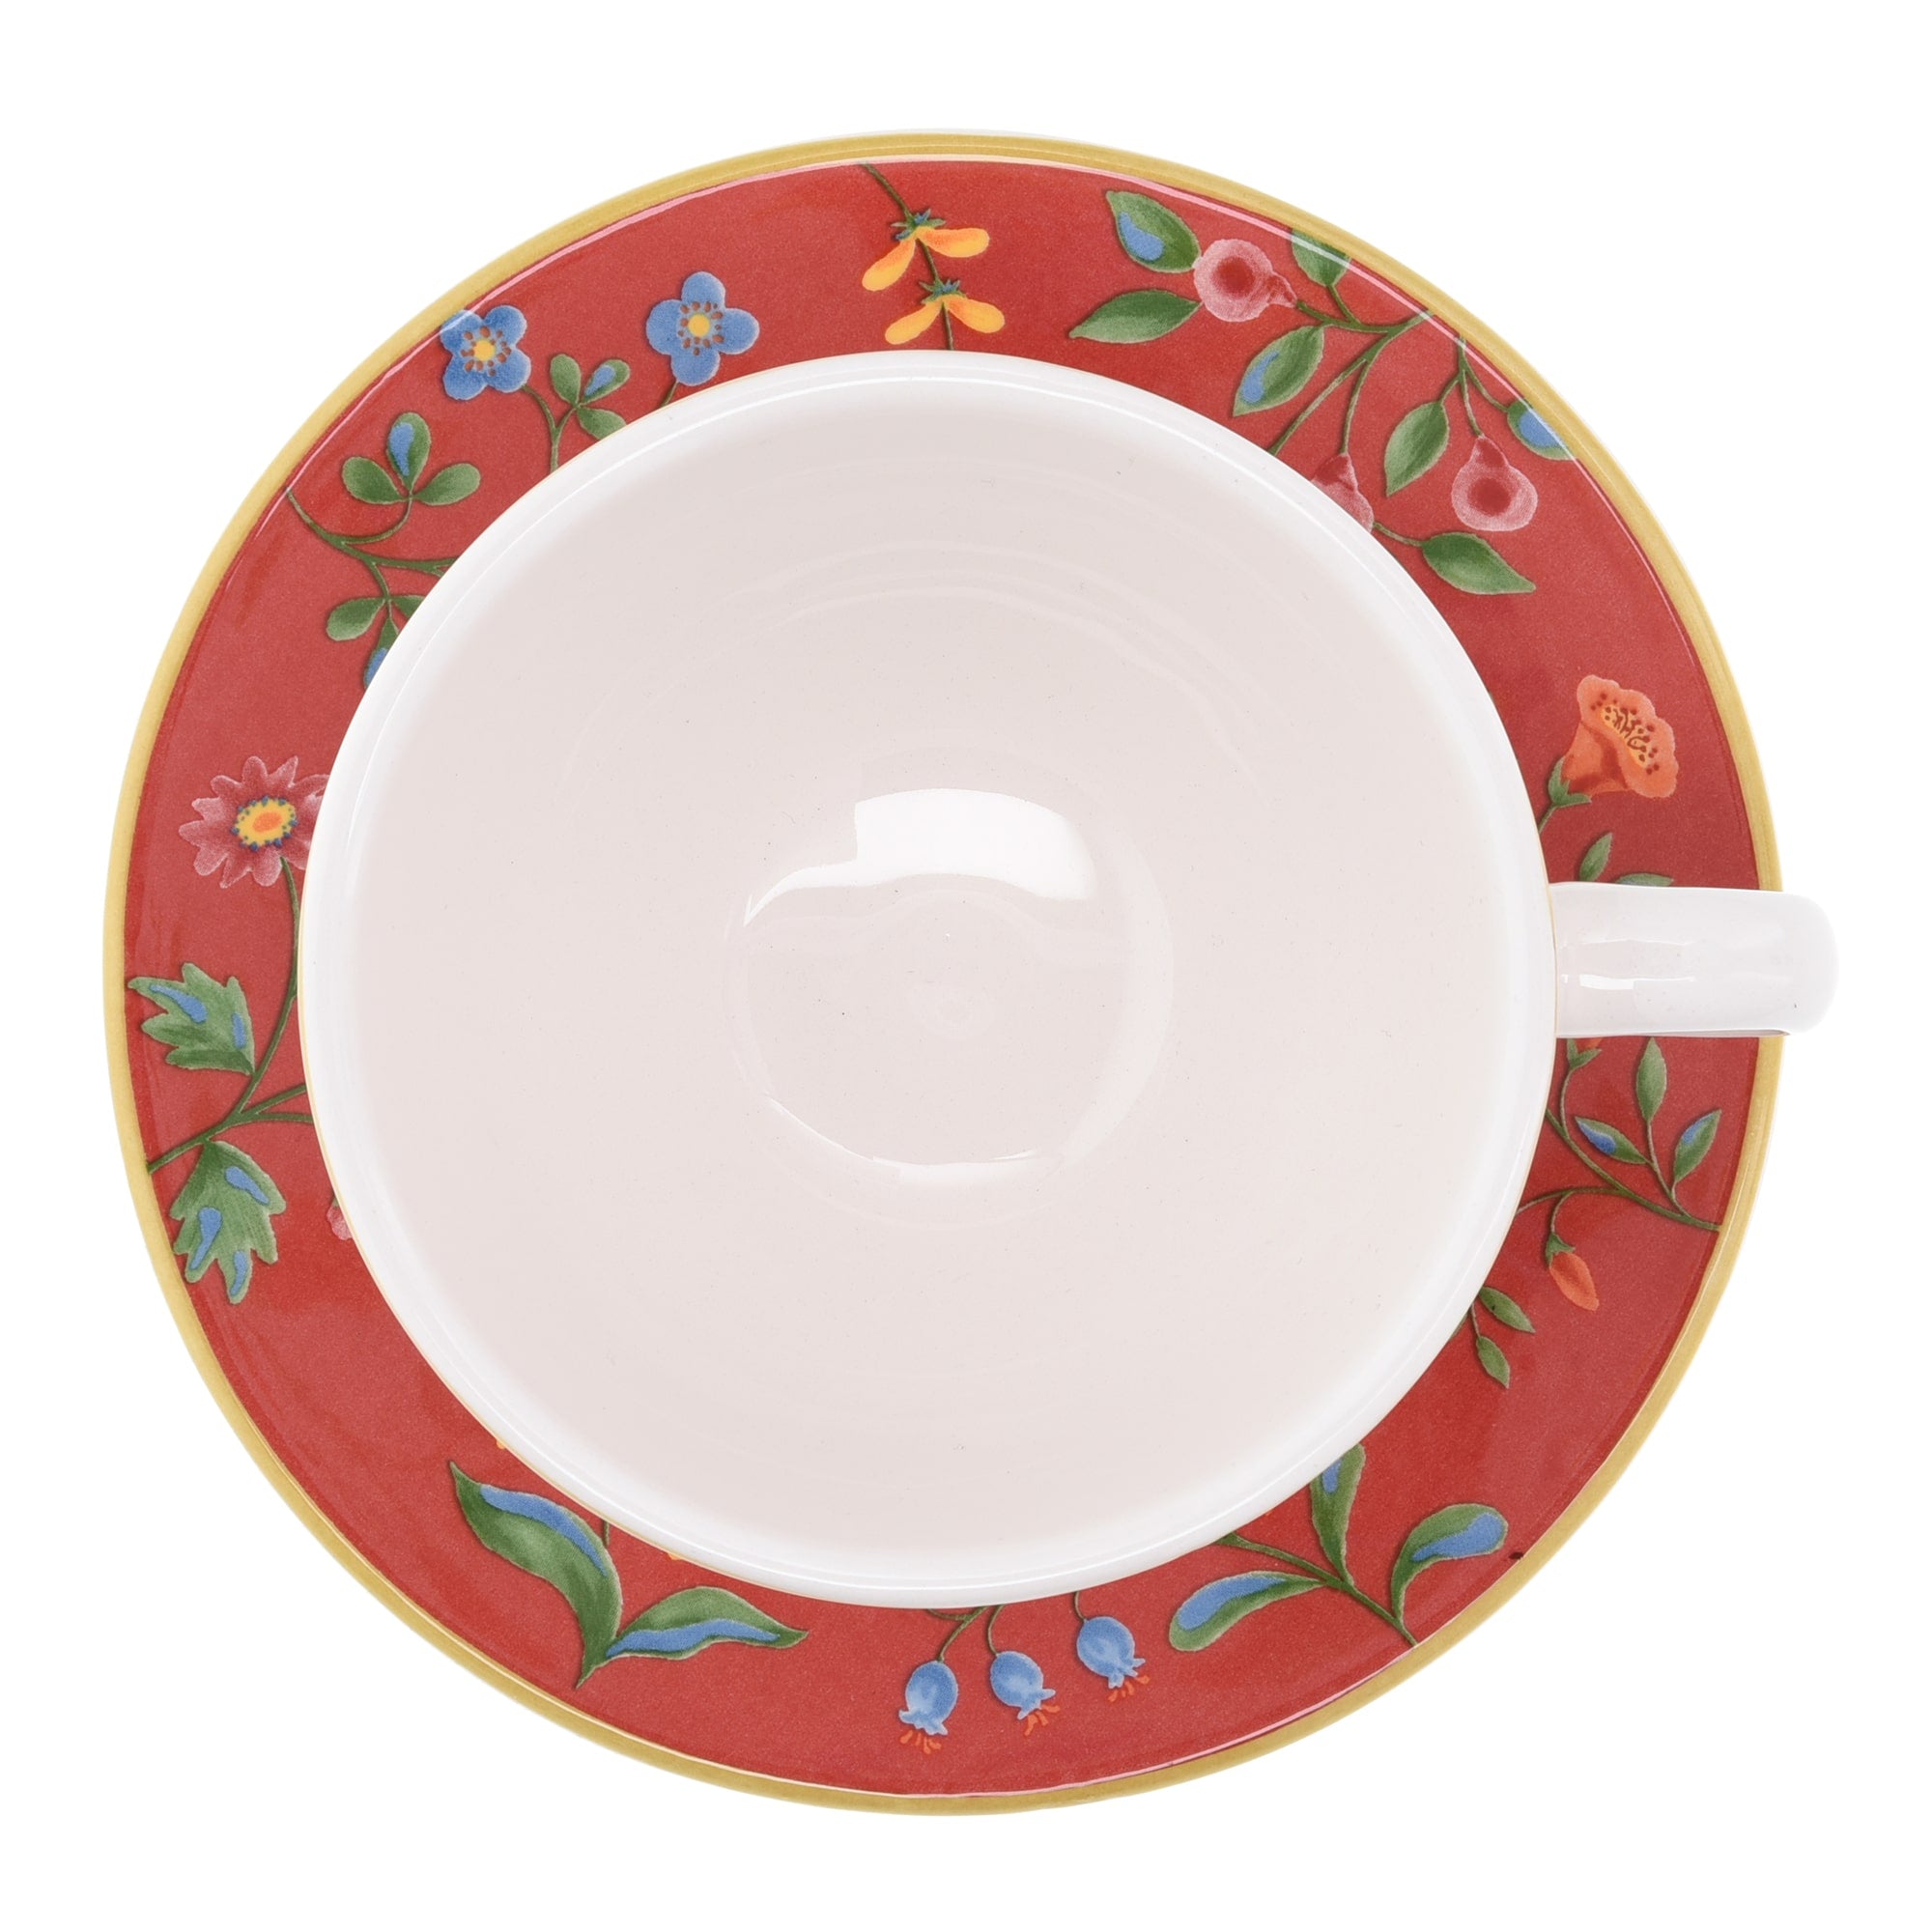 10-OZ Folk Art Inspired Ceramic Cup and Saucer